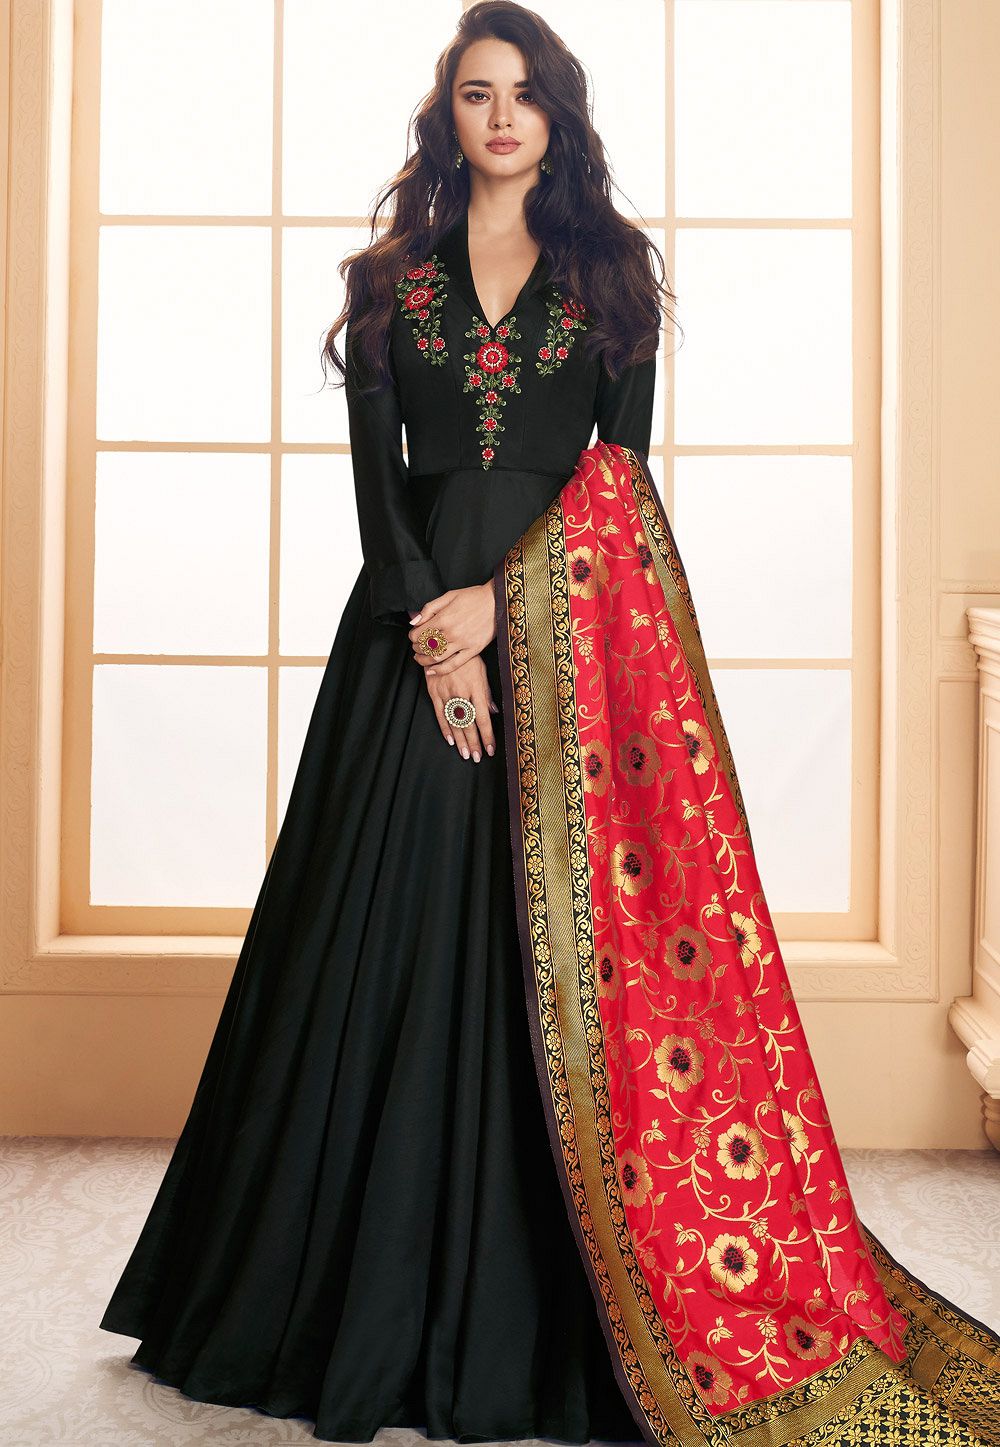 Madhuri Dixit showcases elegance with style and sass in a black gown |  Times of India